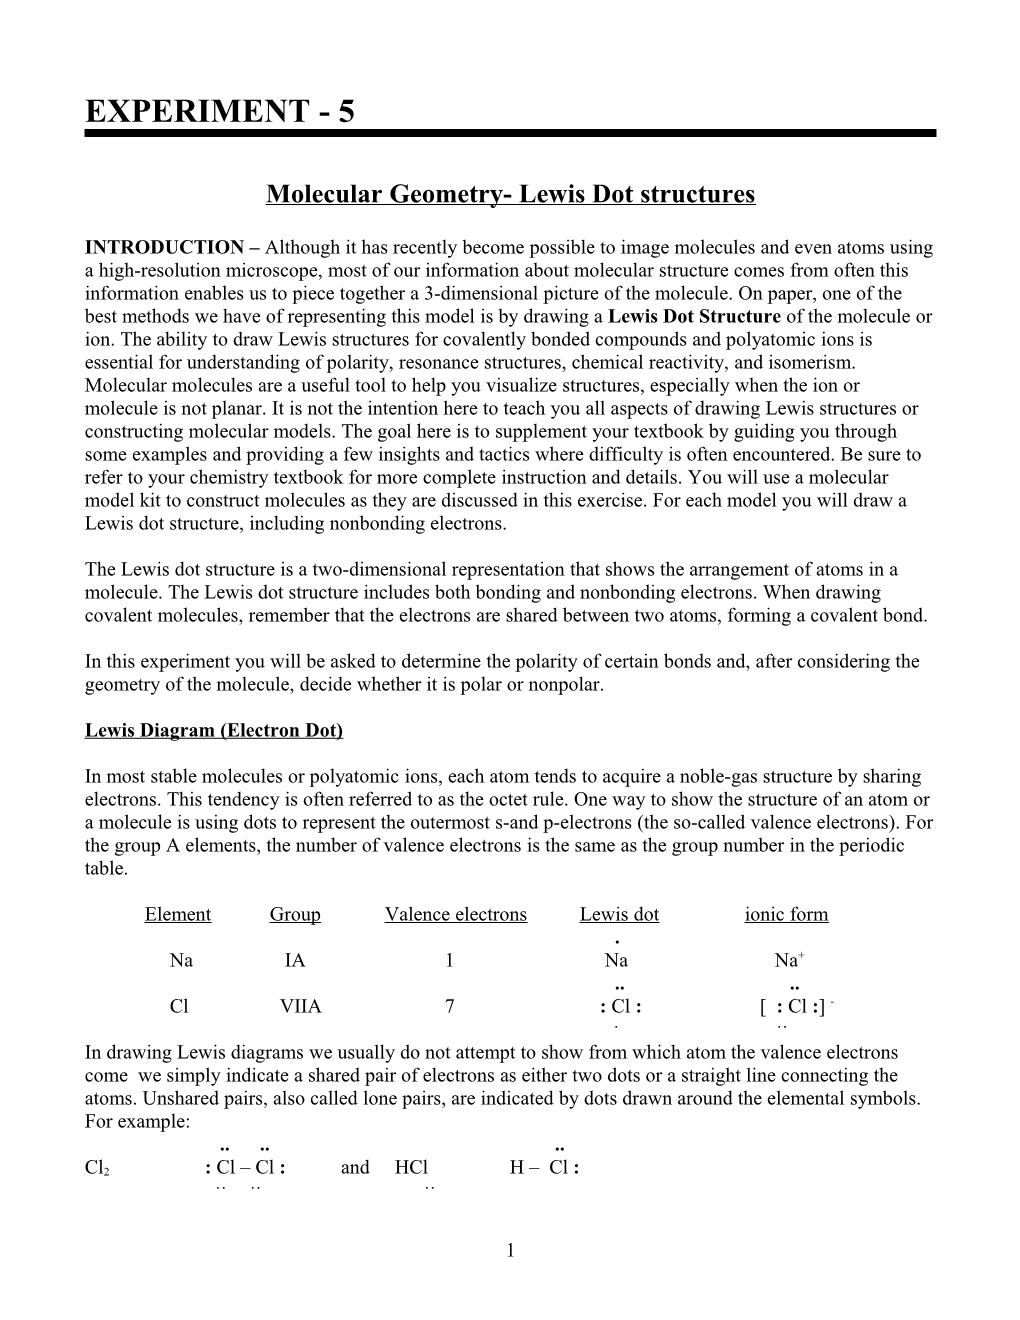 Molecular Geometry- Lewis Dot Structures